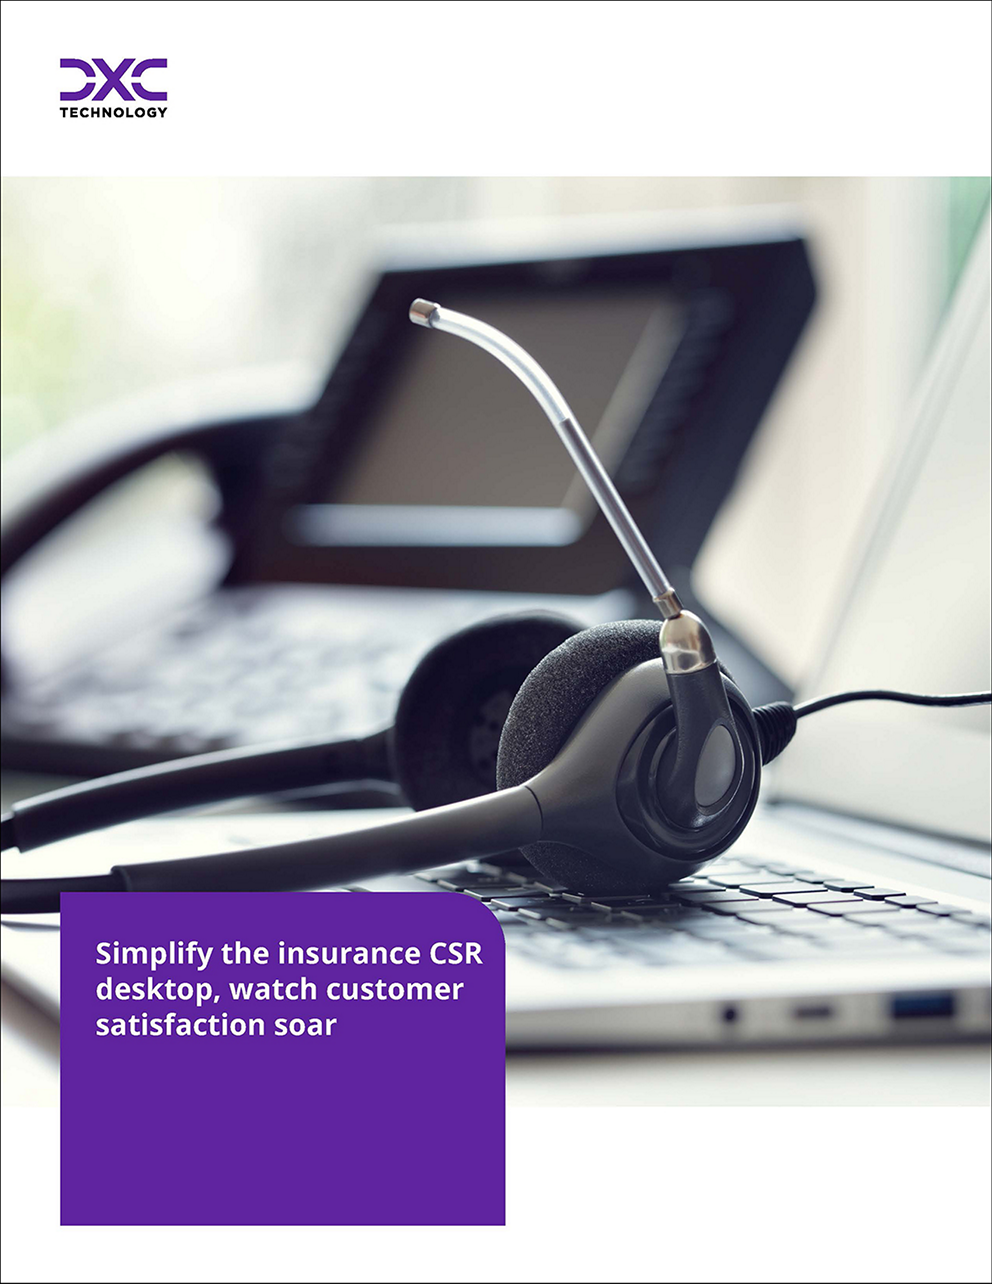 PDF cover with headset on laptop